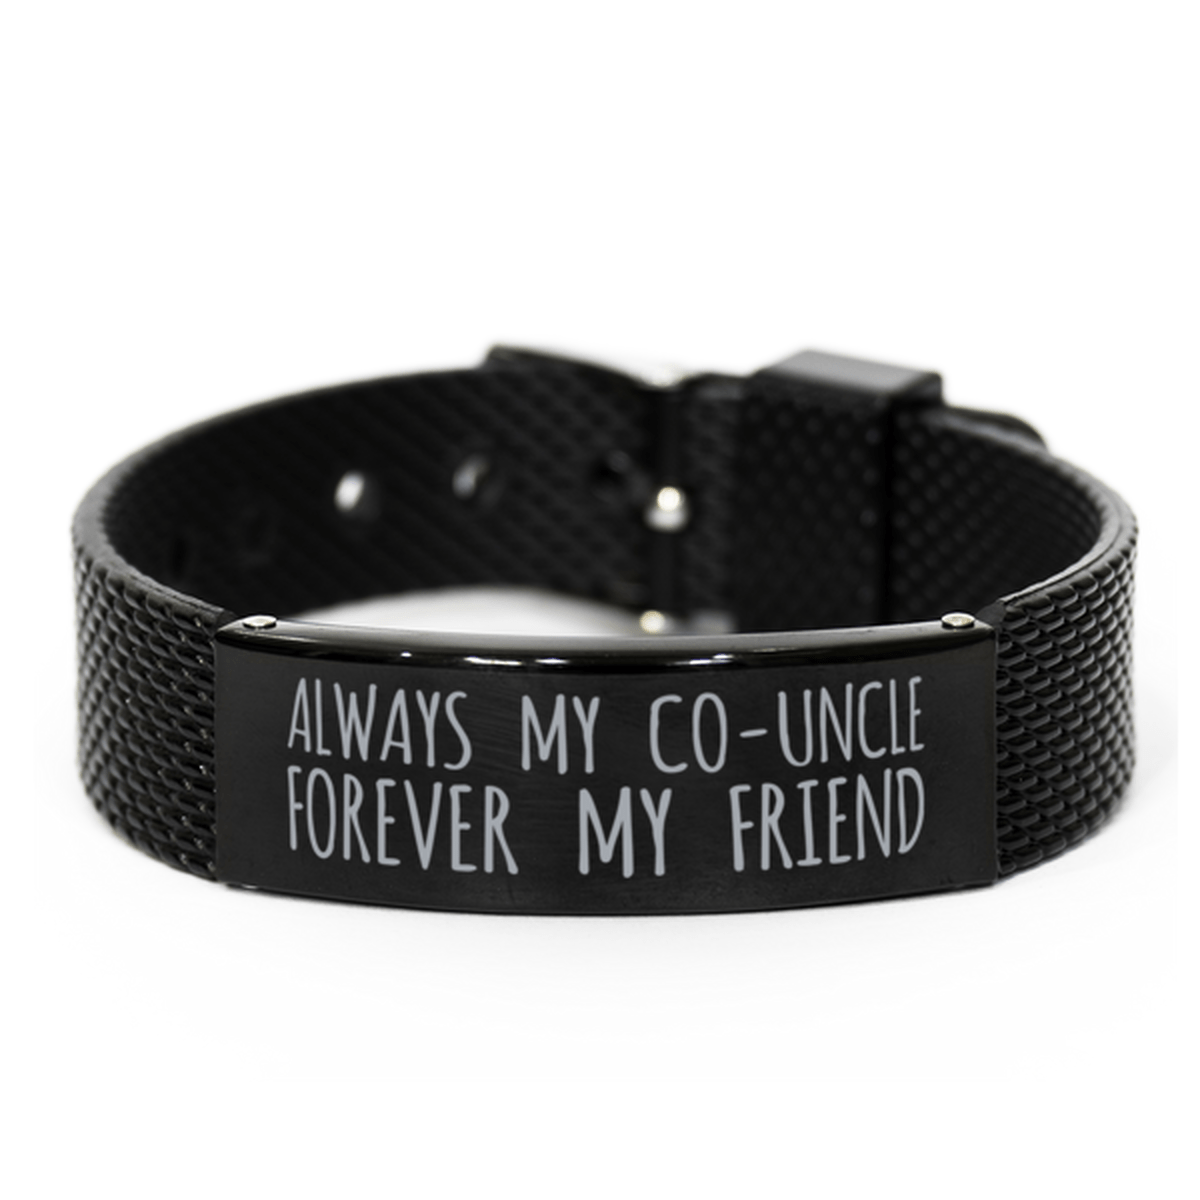 Inspirational Co-Uncle Black Shark Mesh Bracelet, Always My Co-Uncle Forever My Friend, Best Birthday Gifts for Family Friends